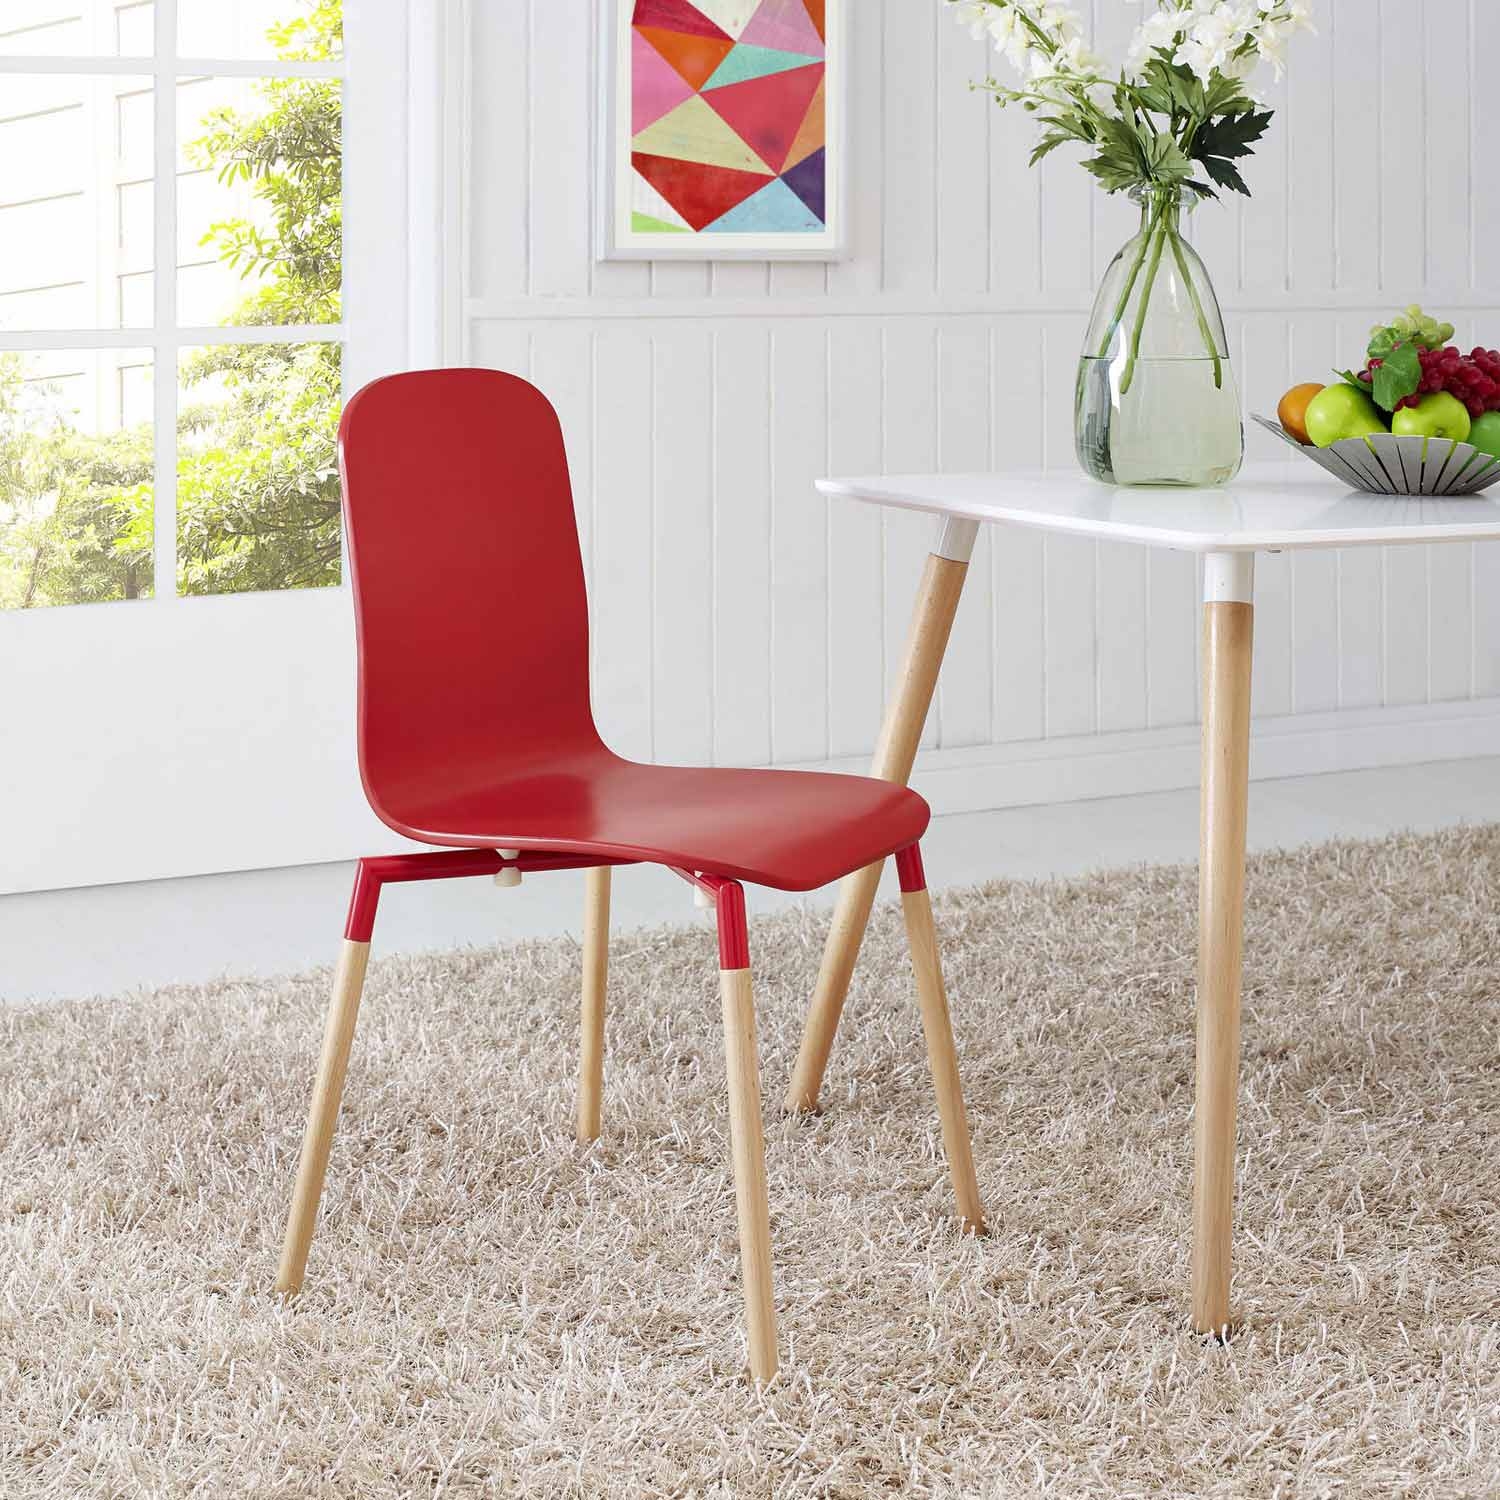 Fancy dining chairs environmental